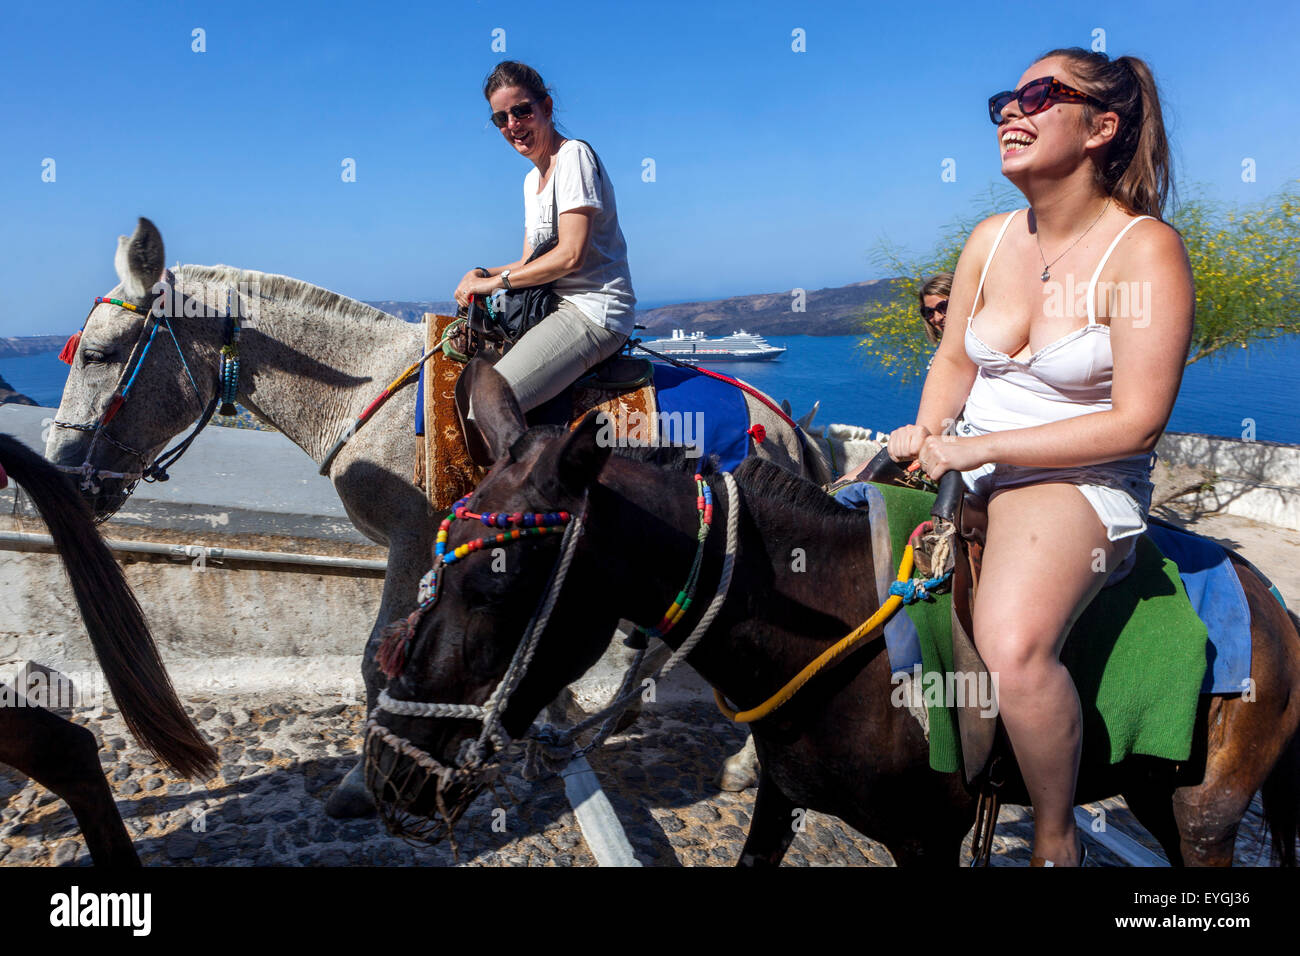 Greece tourists enjoying life, People, Two young women riding donkeys and laughing. Road linking the port to the town of Thira Santorini Greece Stock Photo